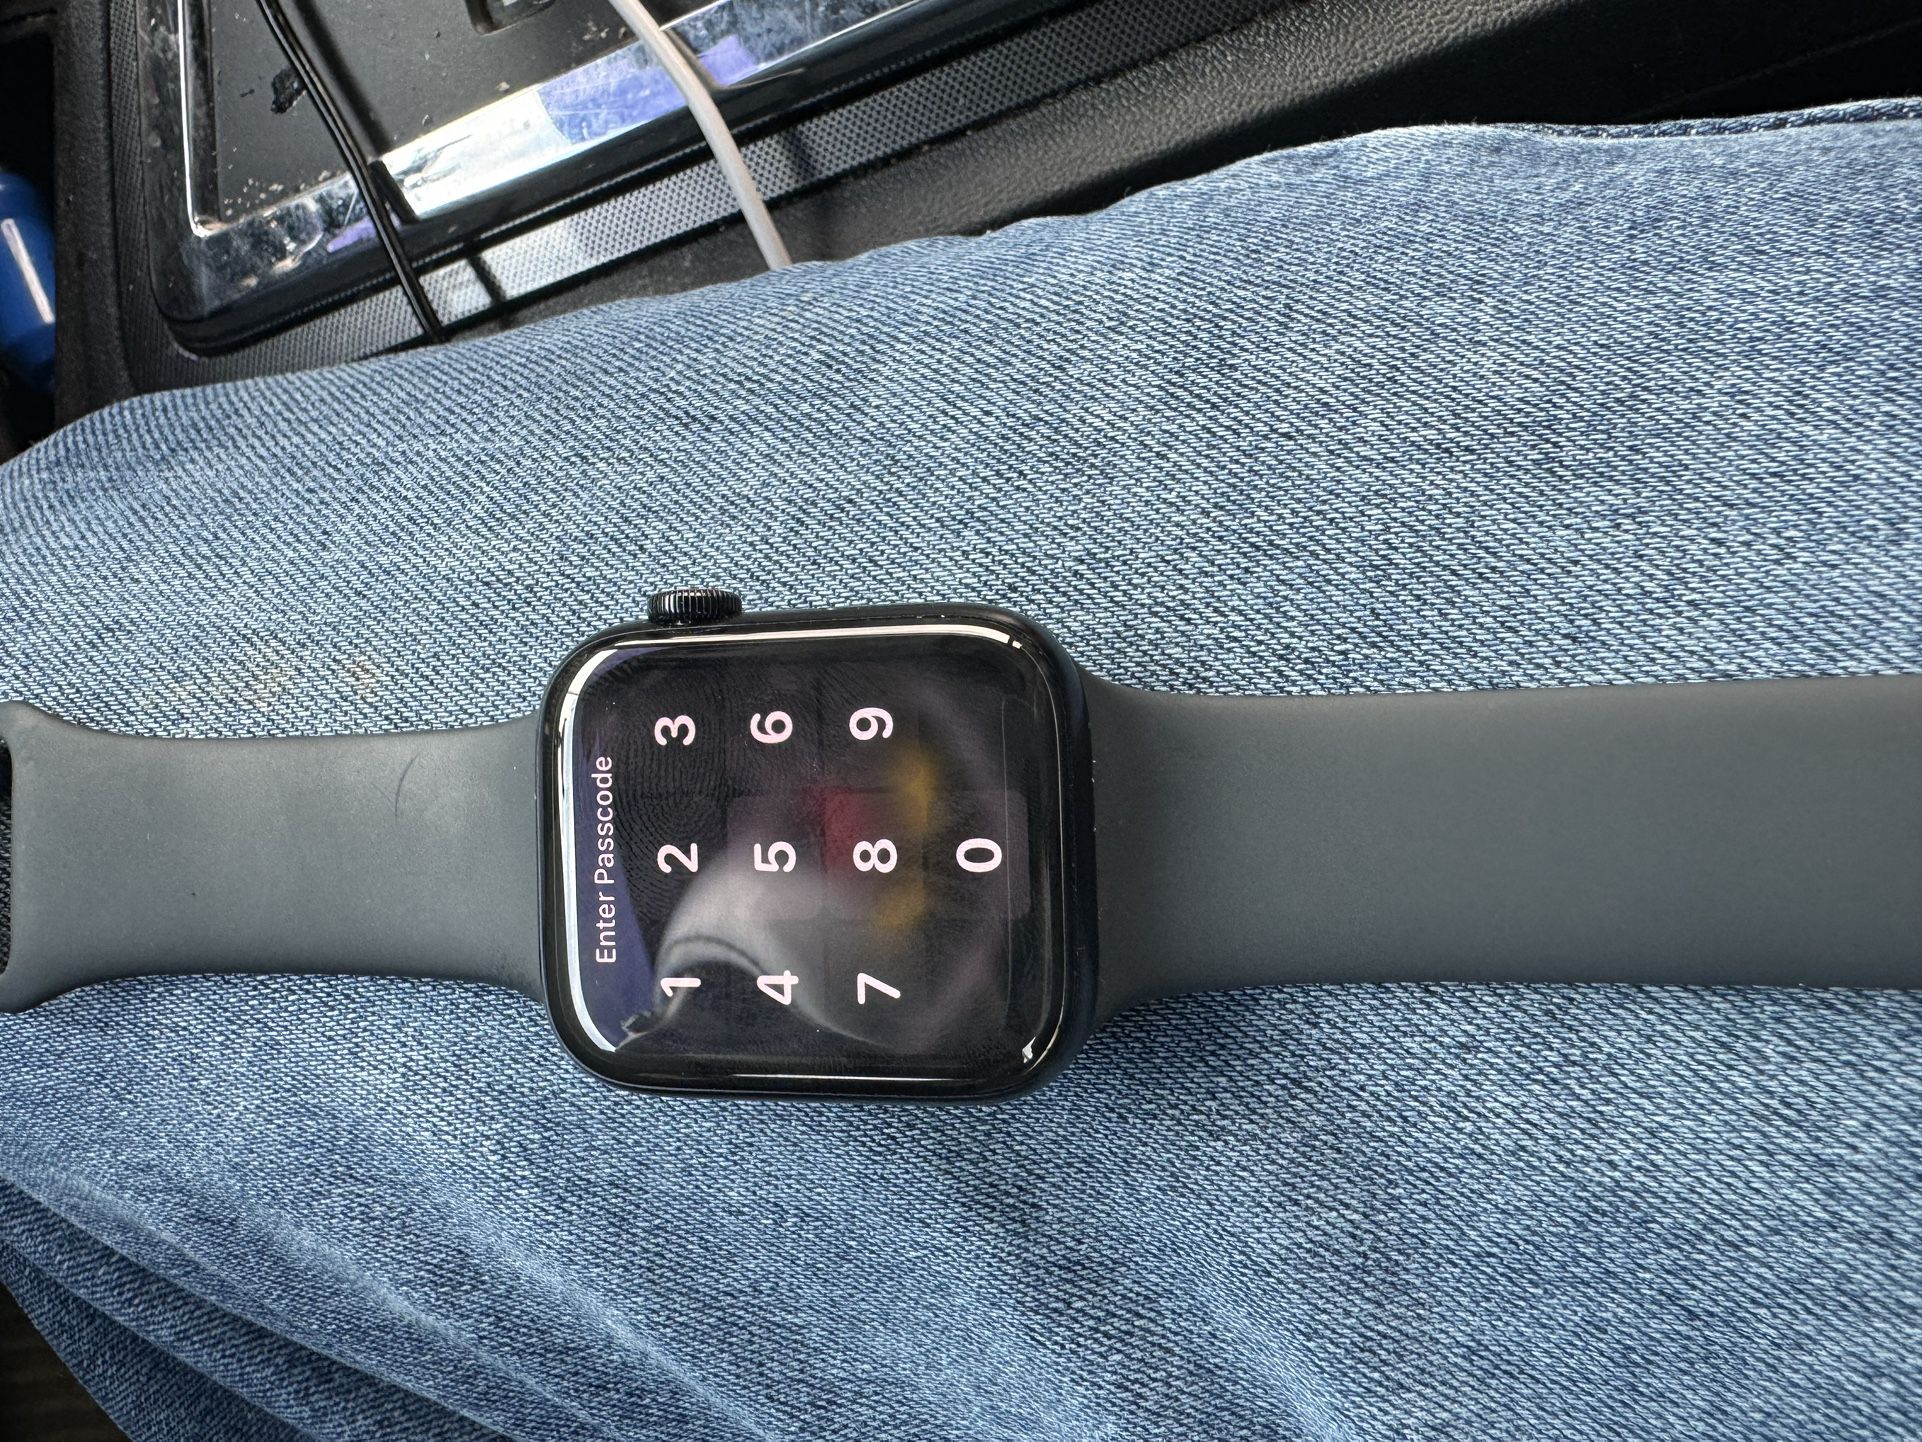 Apple Watch - Pick Up Today!!!!